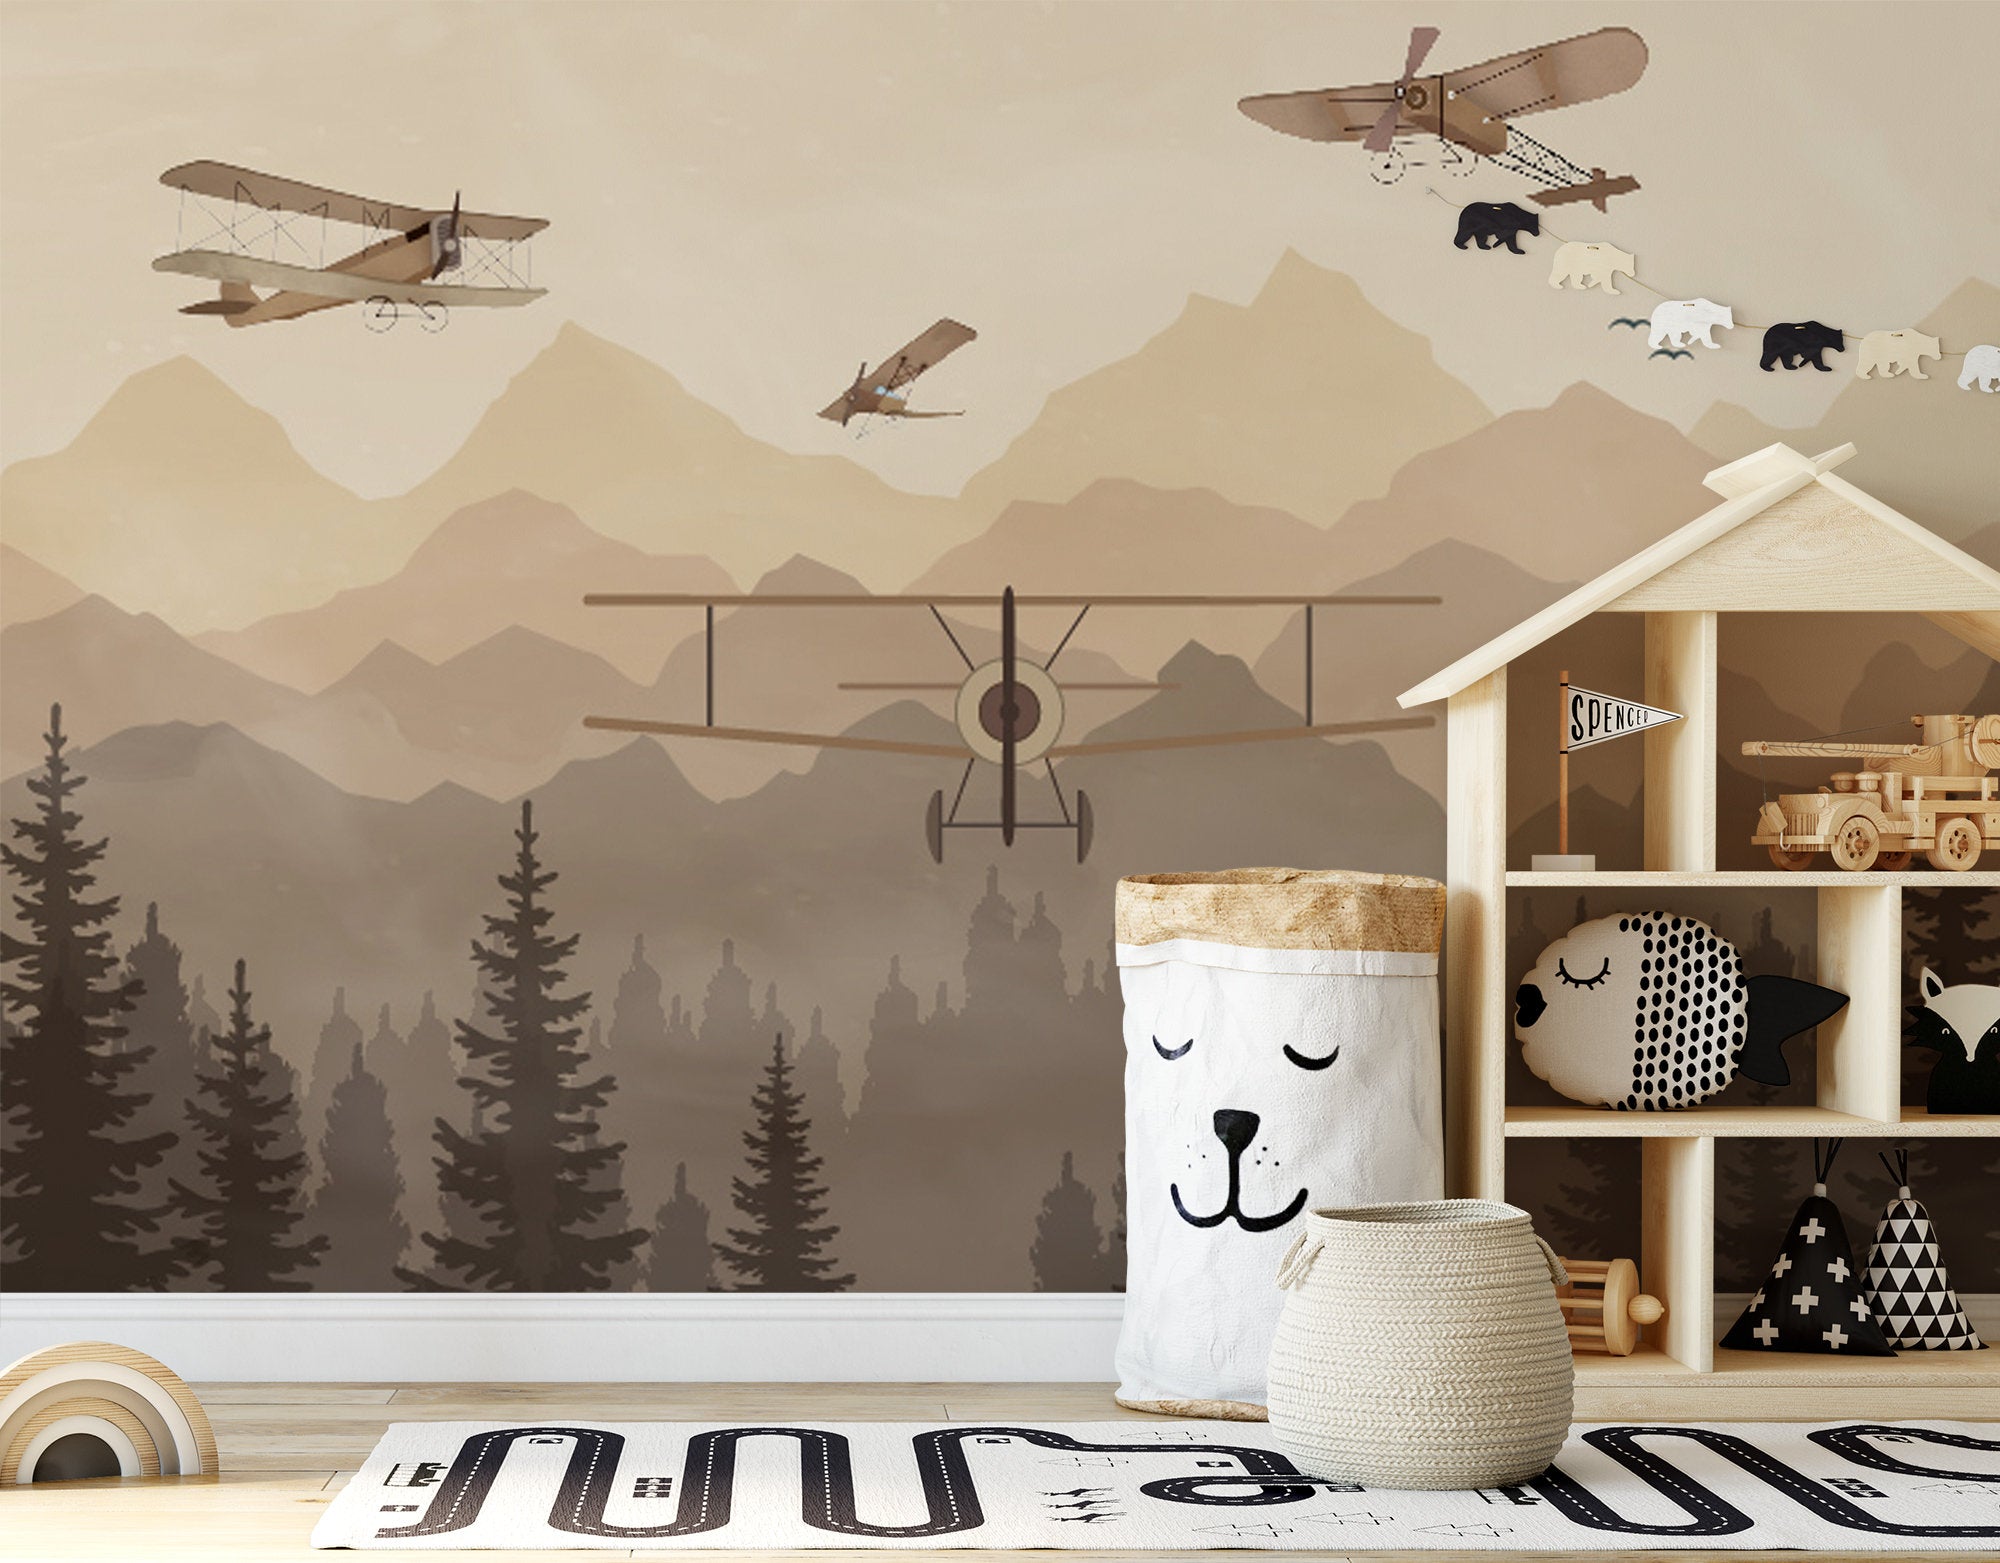 Vintage Airplanes Foggy Forest Row a Mountains Wallpaper Self Adhesive Peel and Stick Wall Sticker Wall Decoration Removable